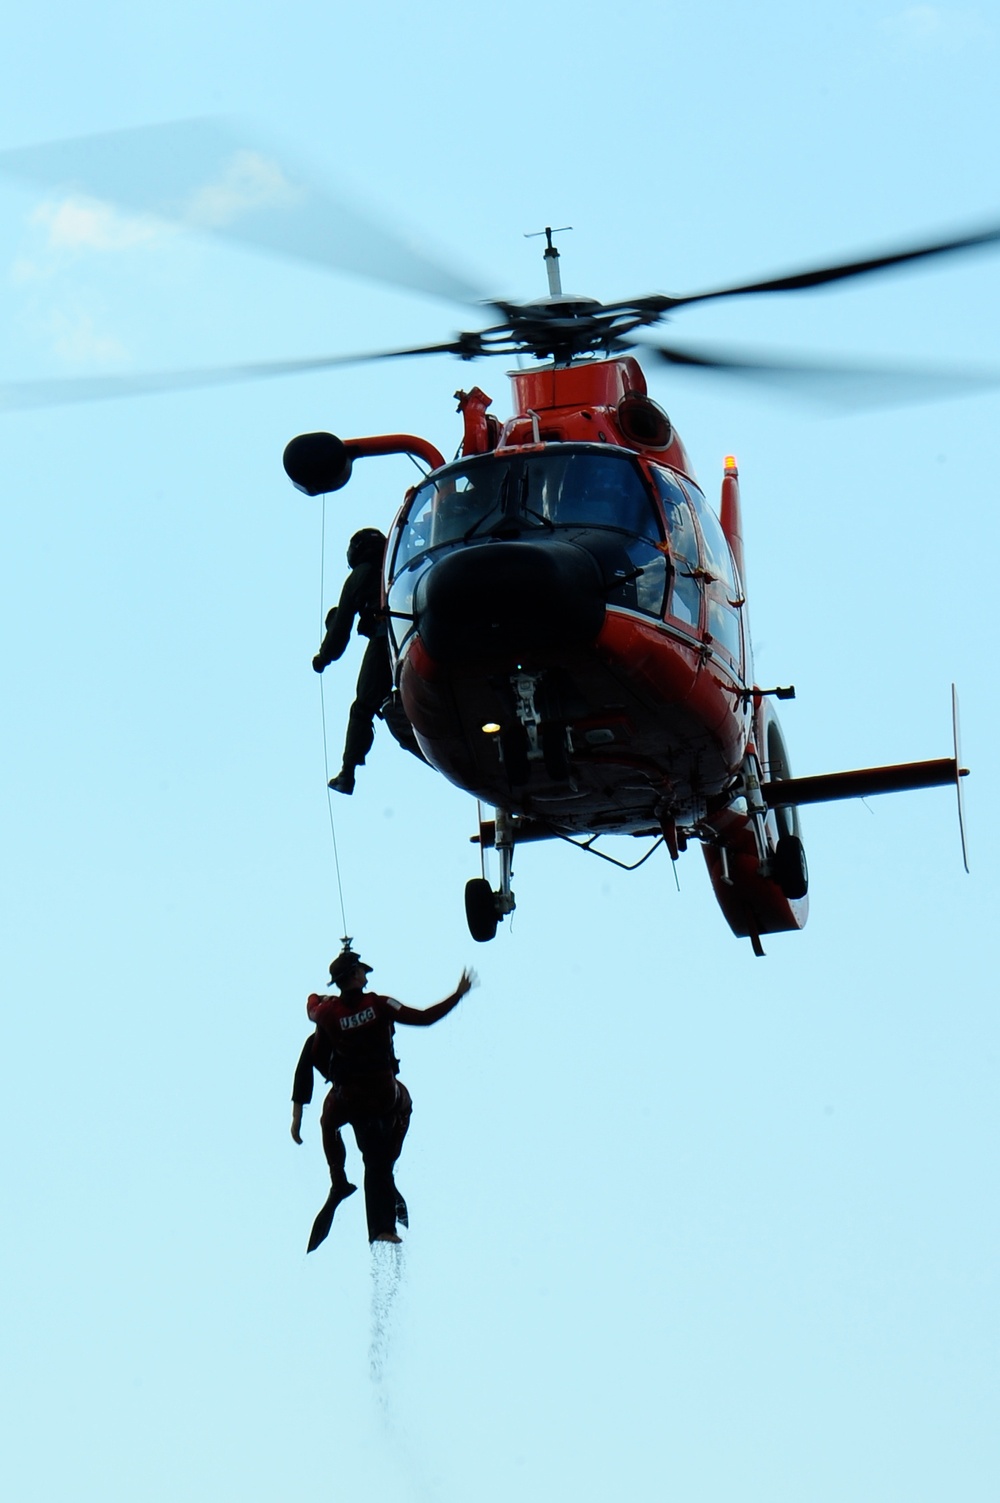 Search and rescue exercise